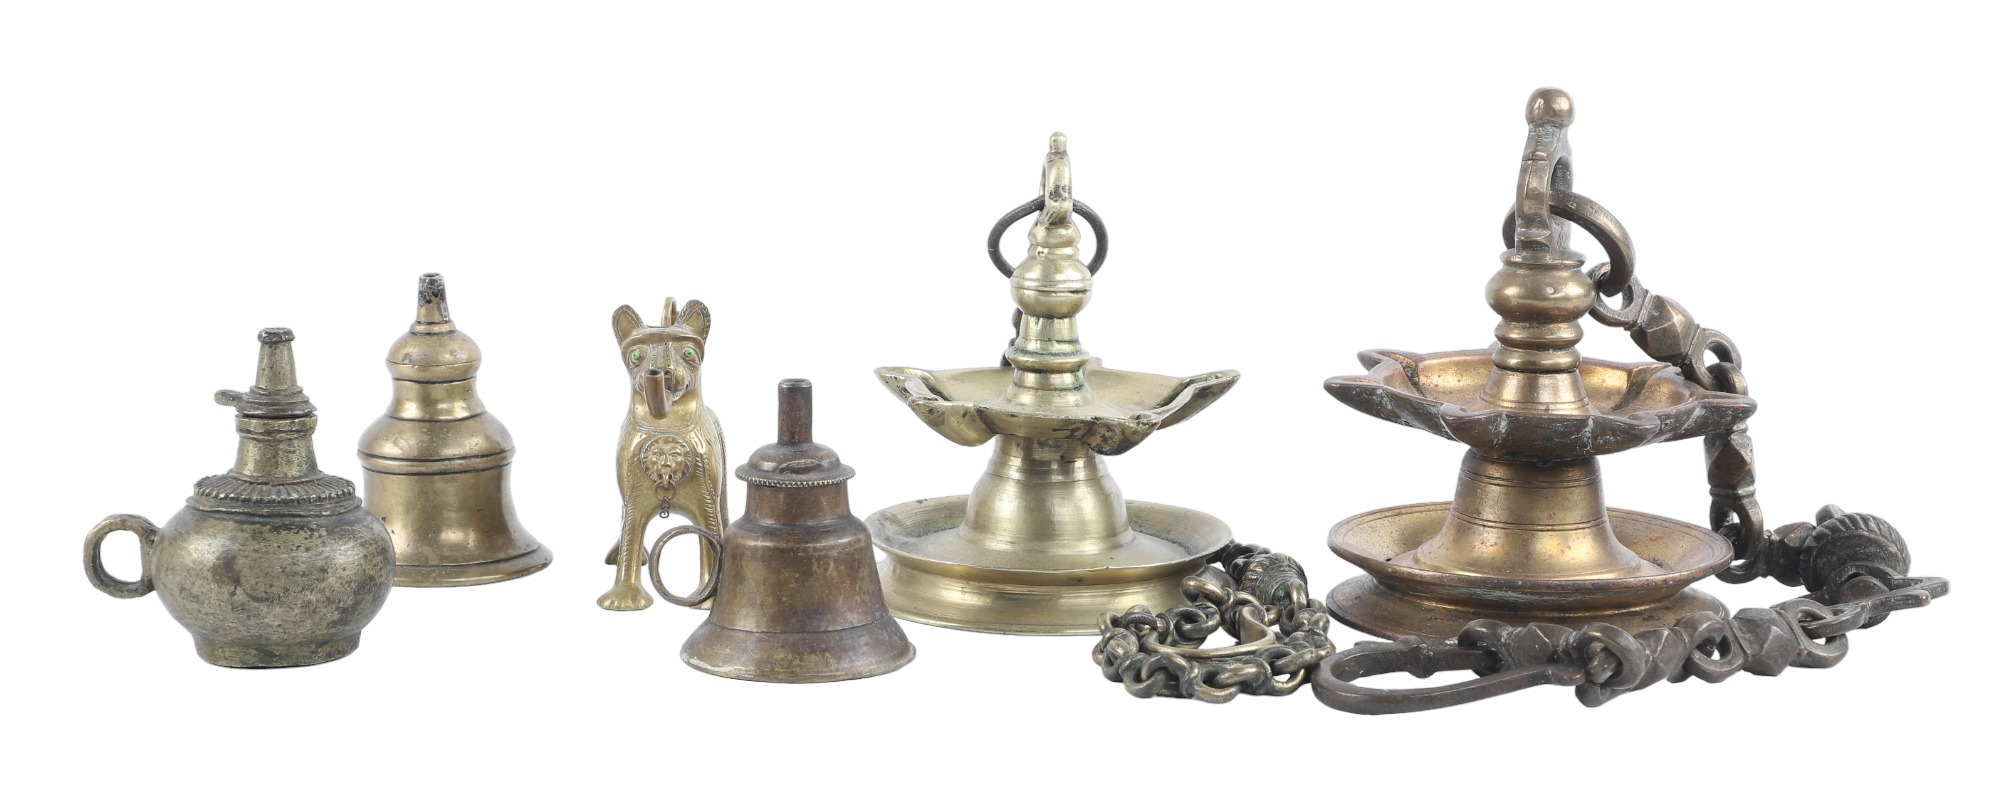  9 Brass and Mixed Metal Oil Lamps 3ca6bb